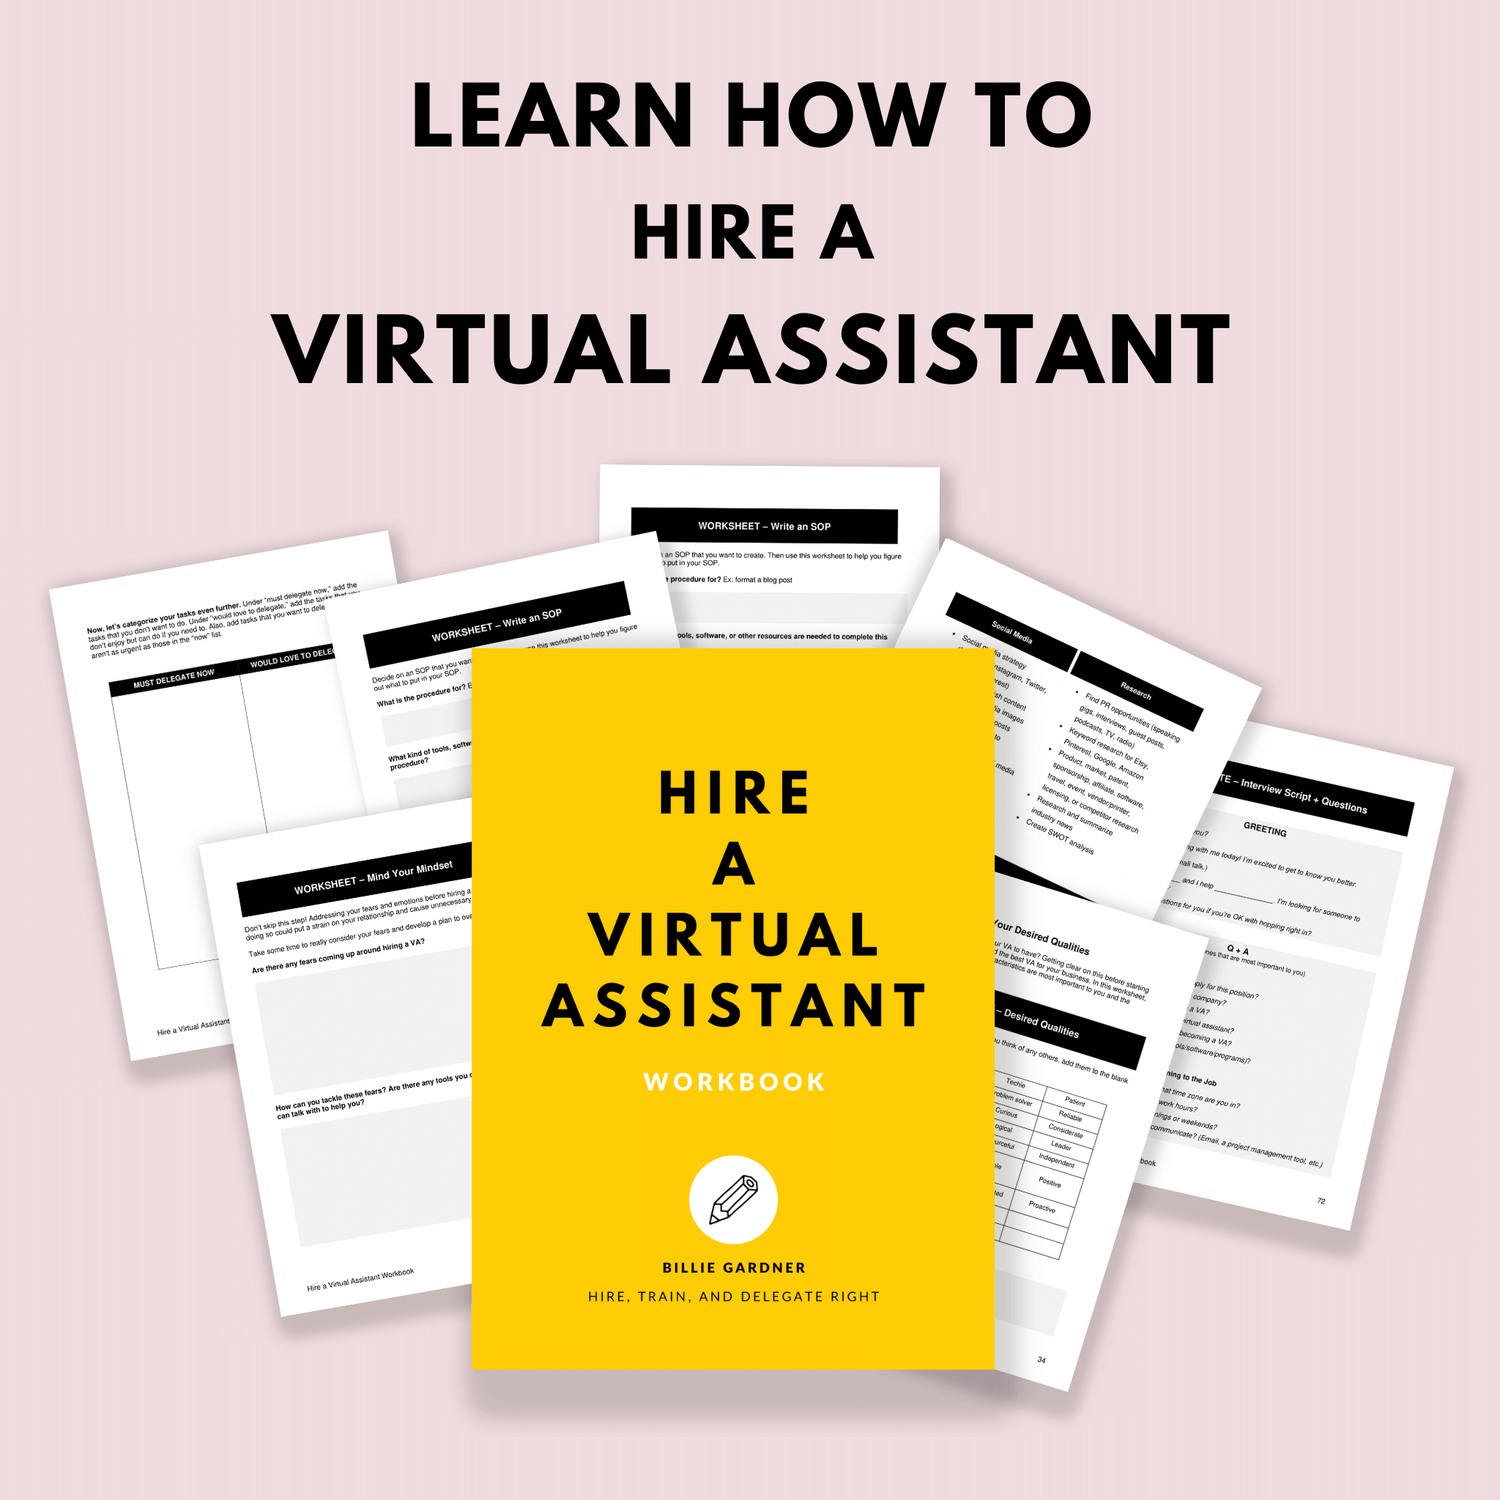 Hire a Virtual Assistant Workbook